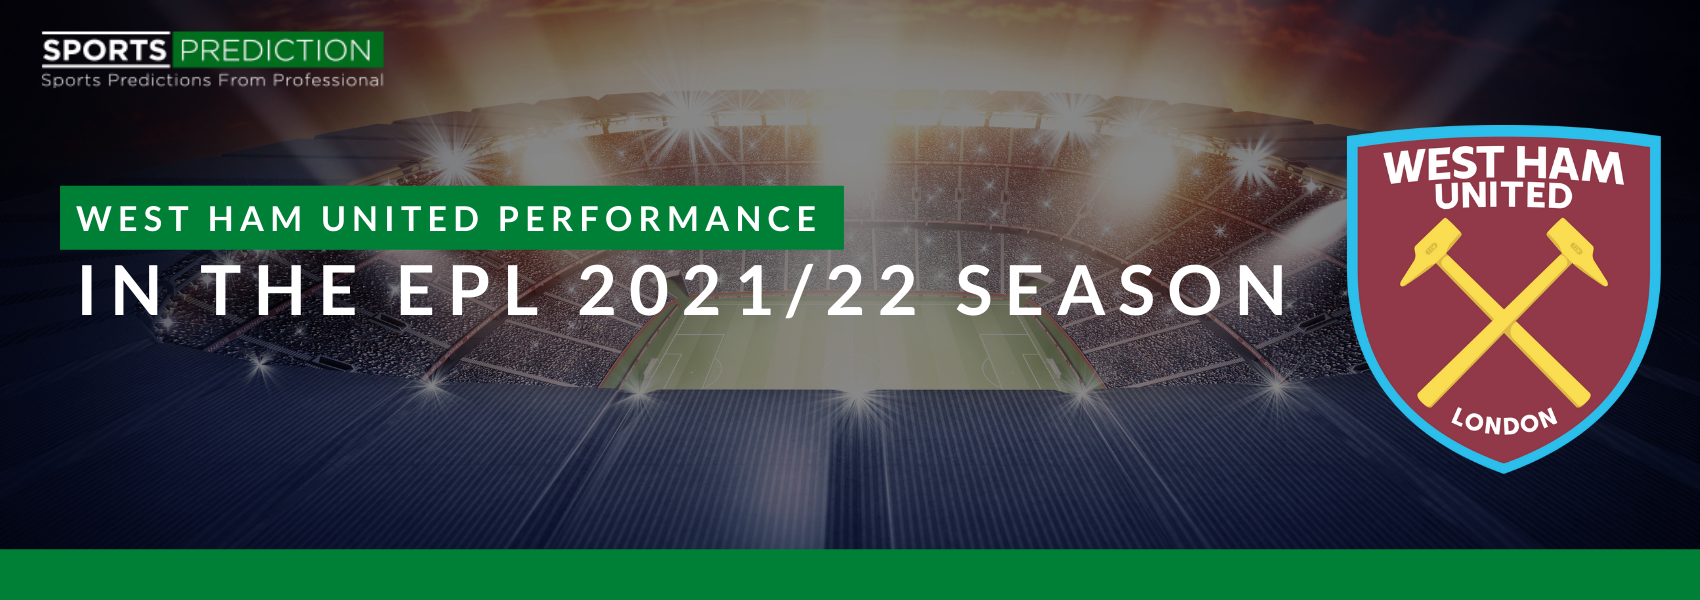 West Ham United Performance In The EPL 2021/22 Season